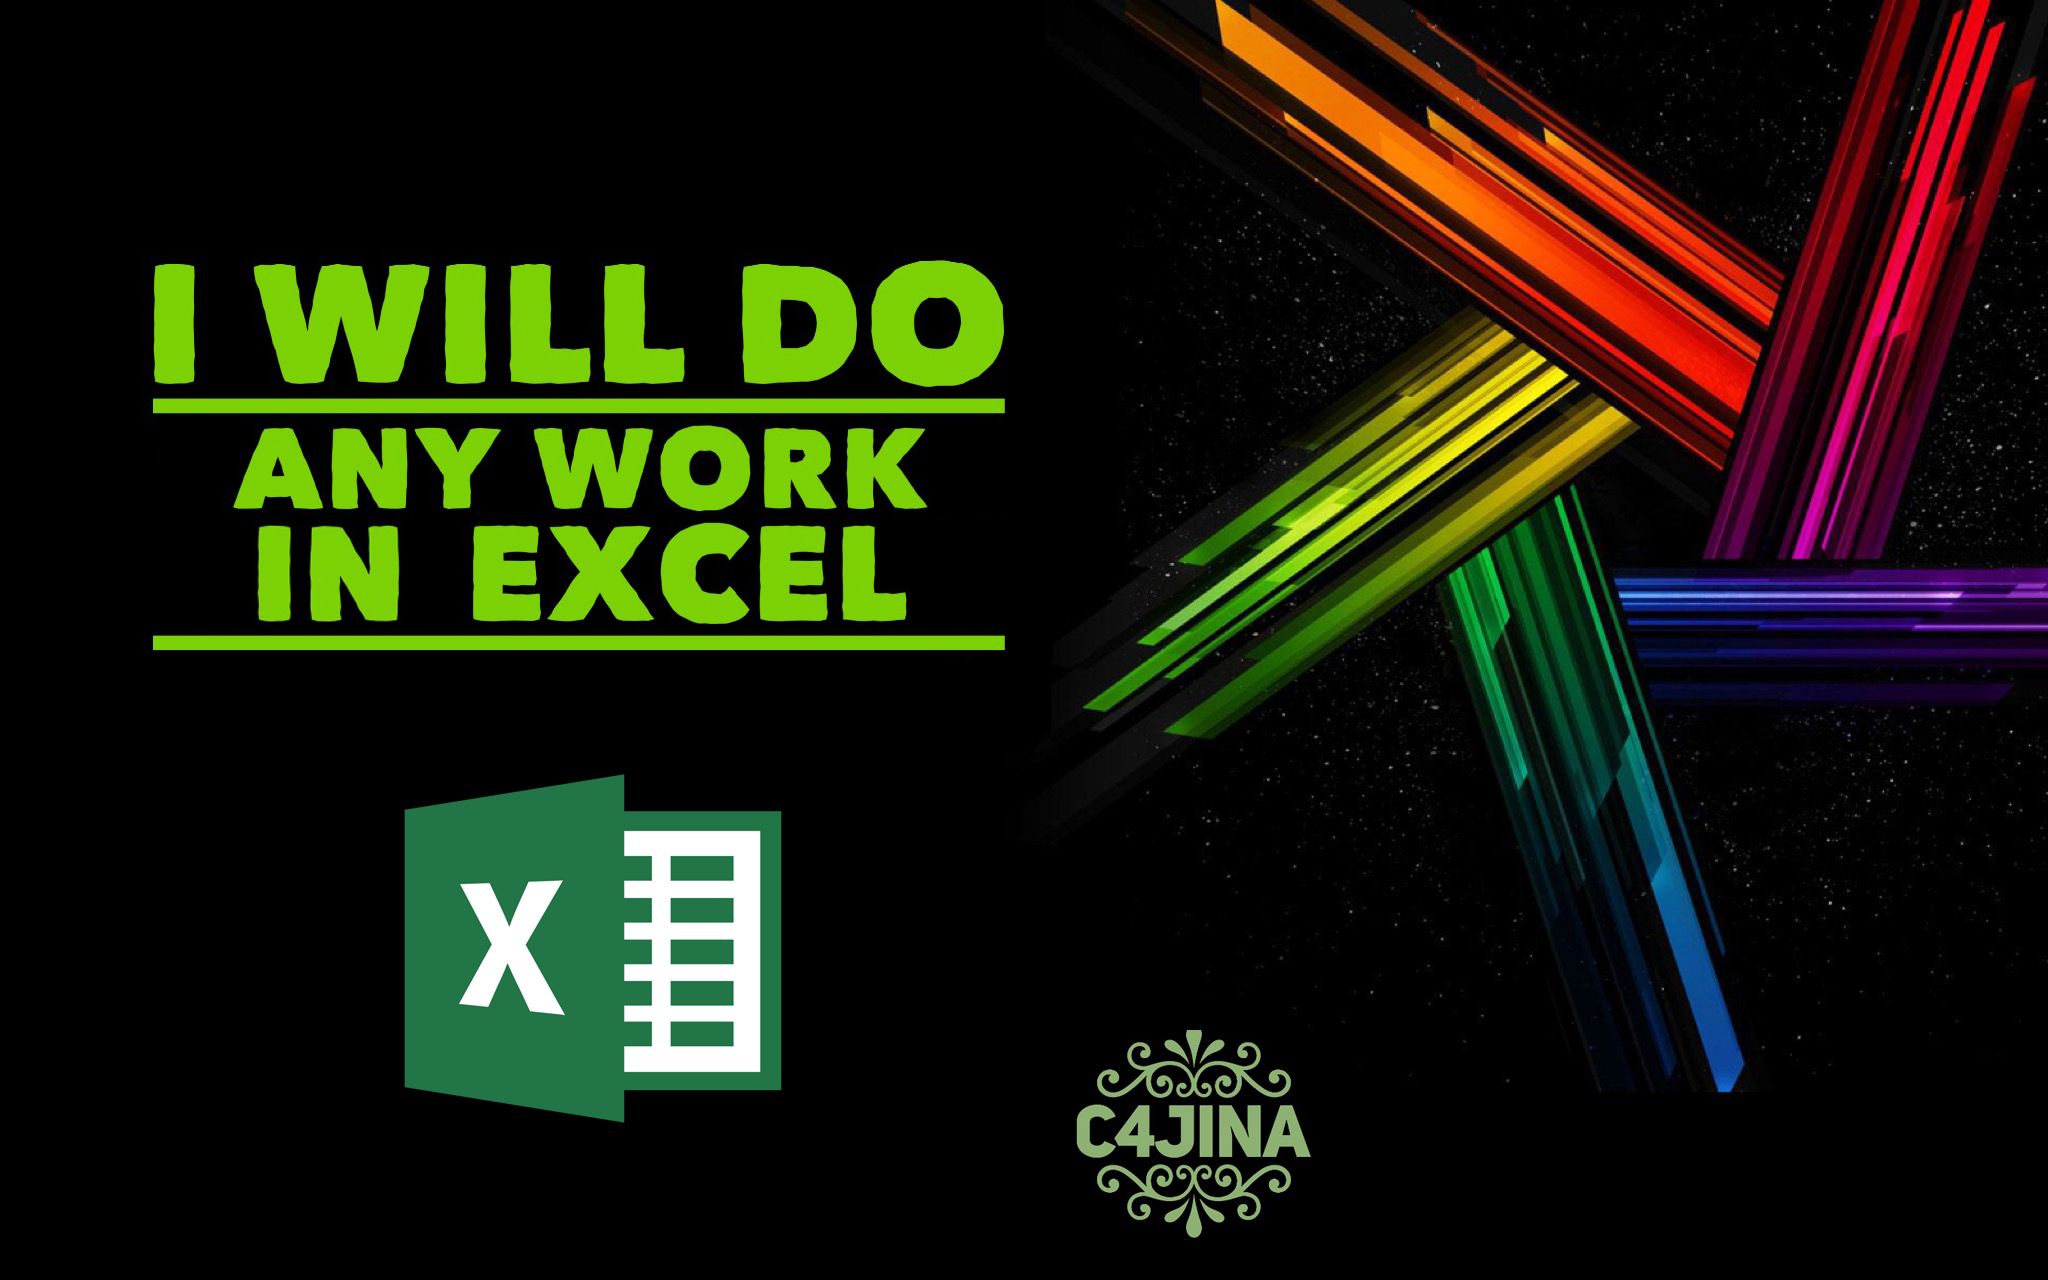 I WILL DO ANY WORK IN EXCEL.jpg